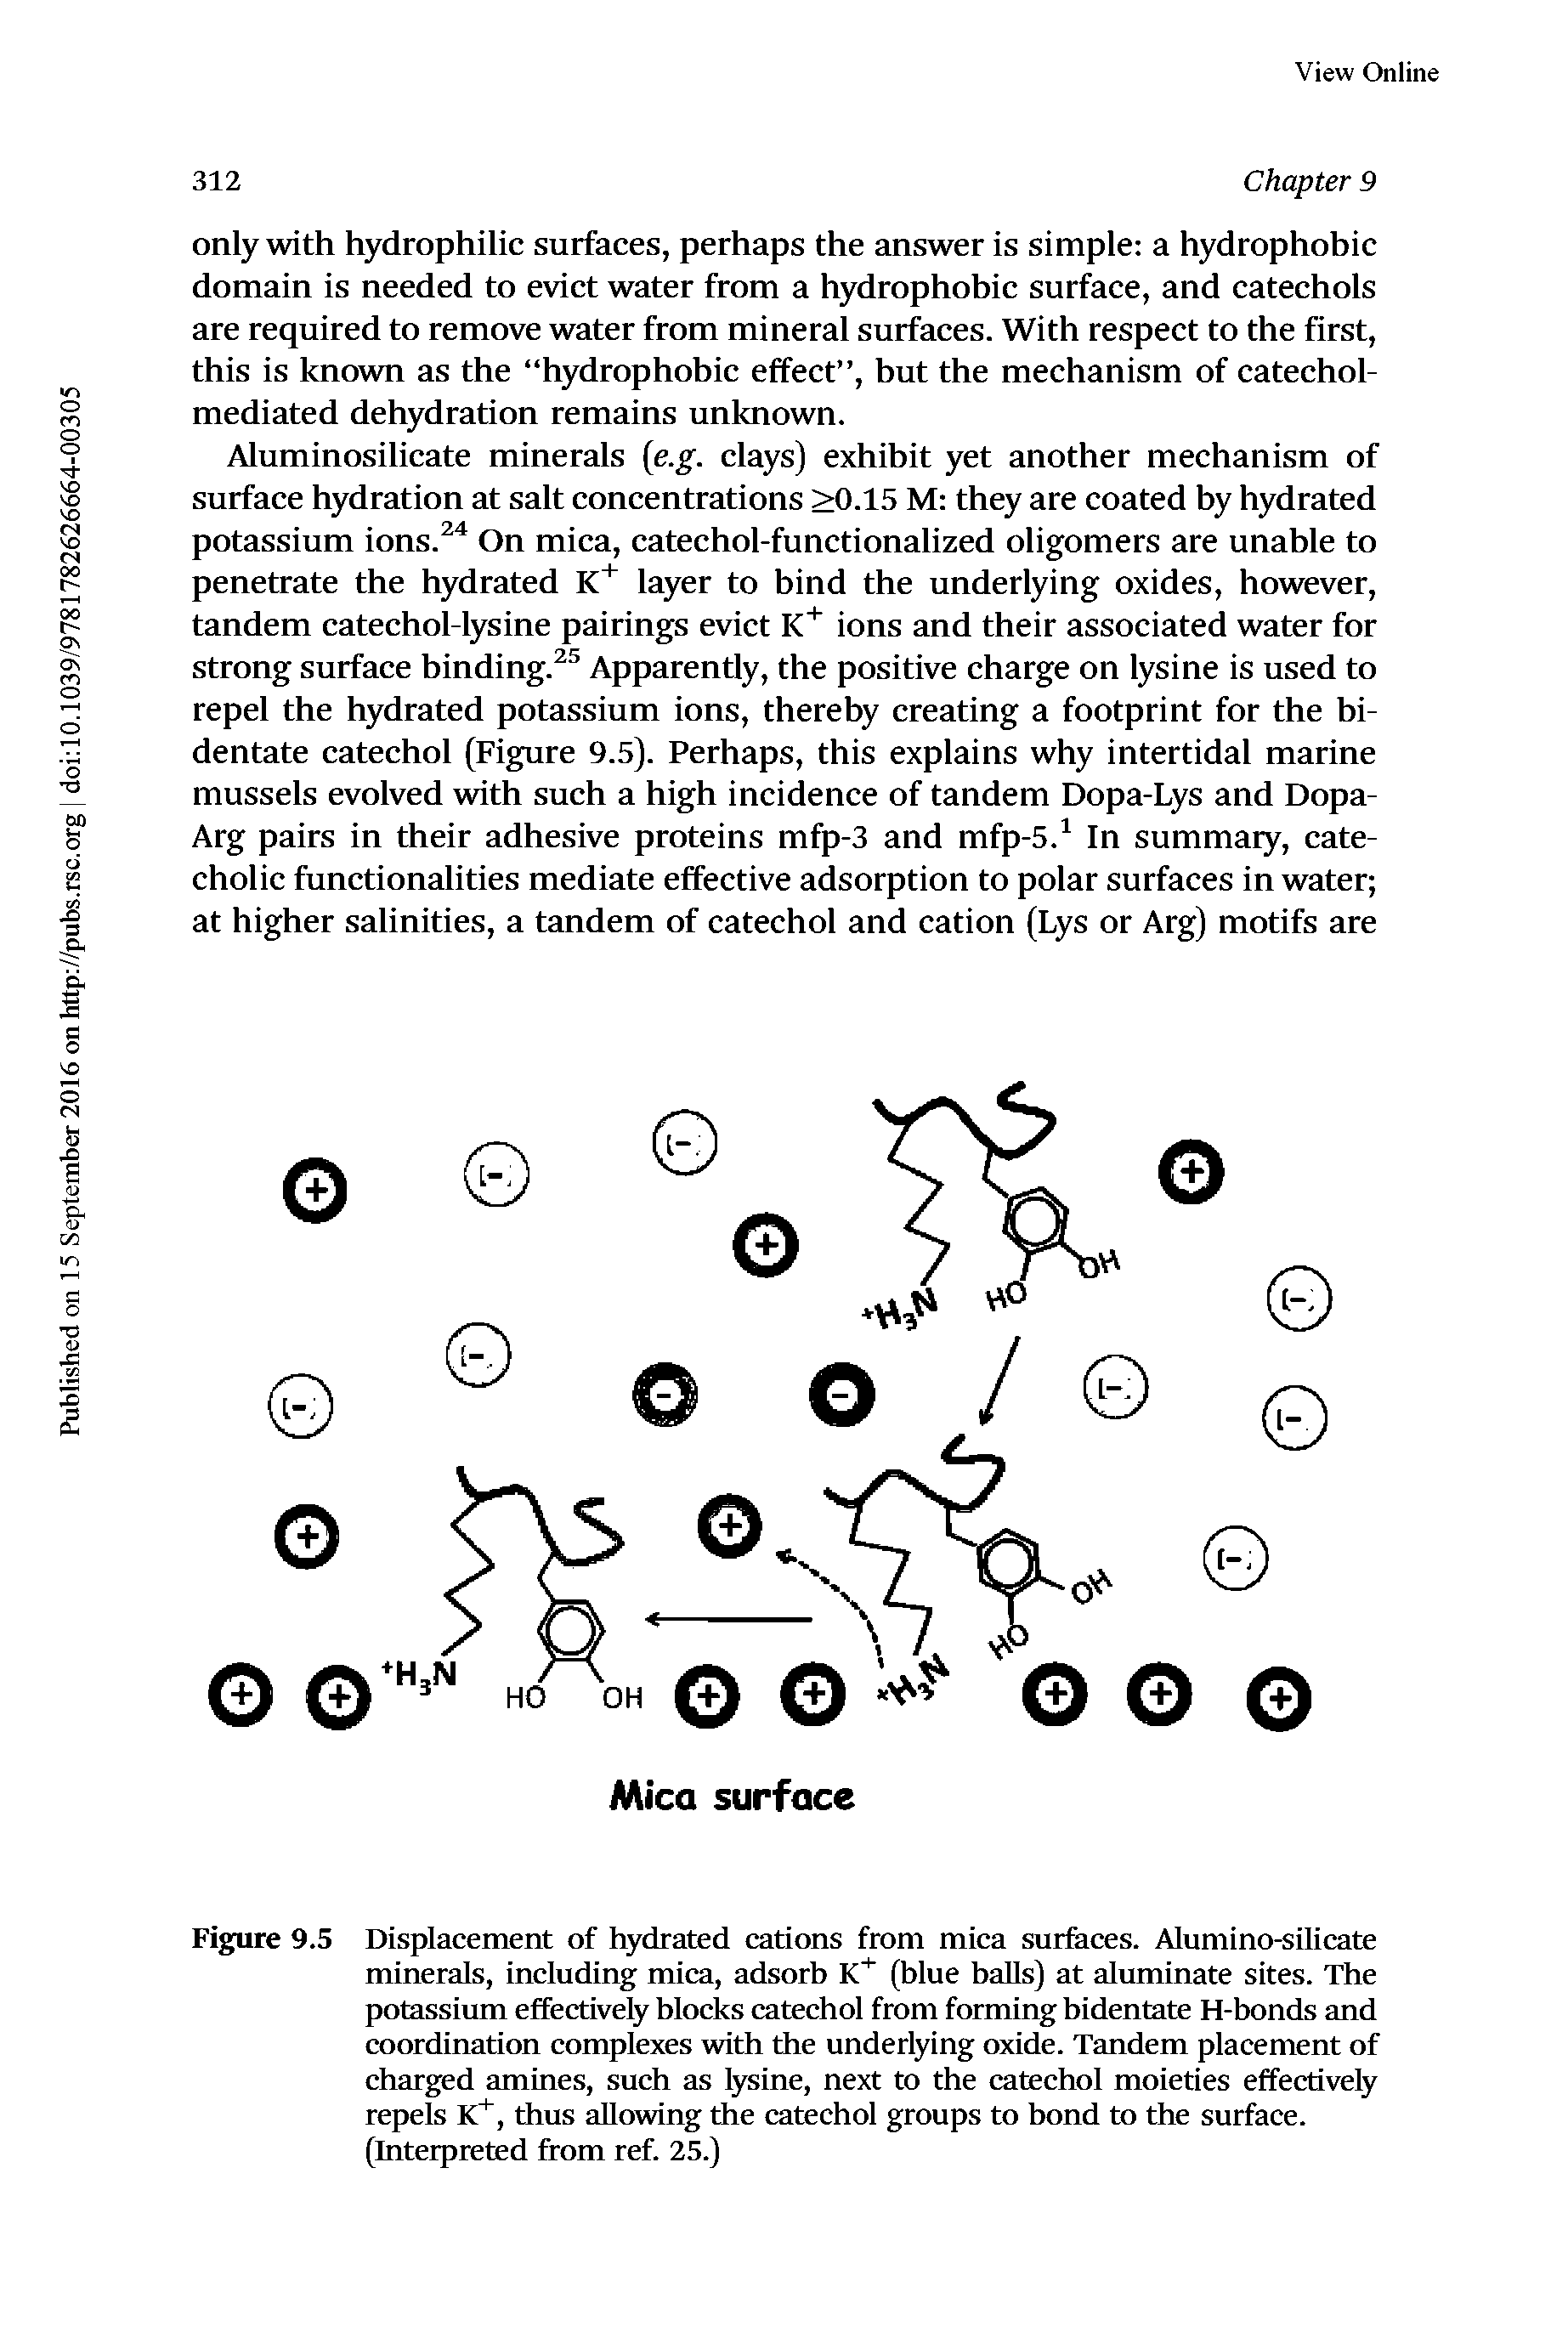 Figure 9.5 Displacement of hydrated cations from mica surfaces. Alumino-silicate minerals, including mica, adsorb (blue balls) at aluminate sites. The potassium effectively blocks catechol from forming bidentate H-bonds and coordination complexes with the underlying oxide. Tandem placement of charged amines, such as fysine, next to the catechol moieties effectively repels KT, thus allowing the catechol groups to bond to the surface. (Interpreted from ref. 25.)...